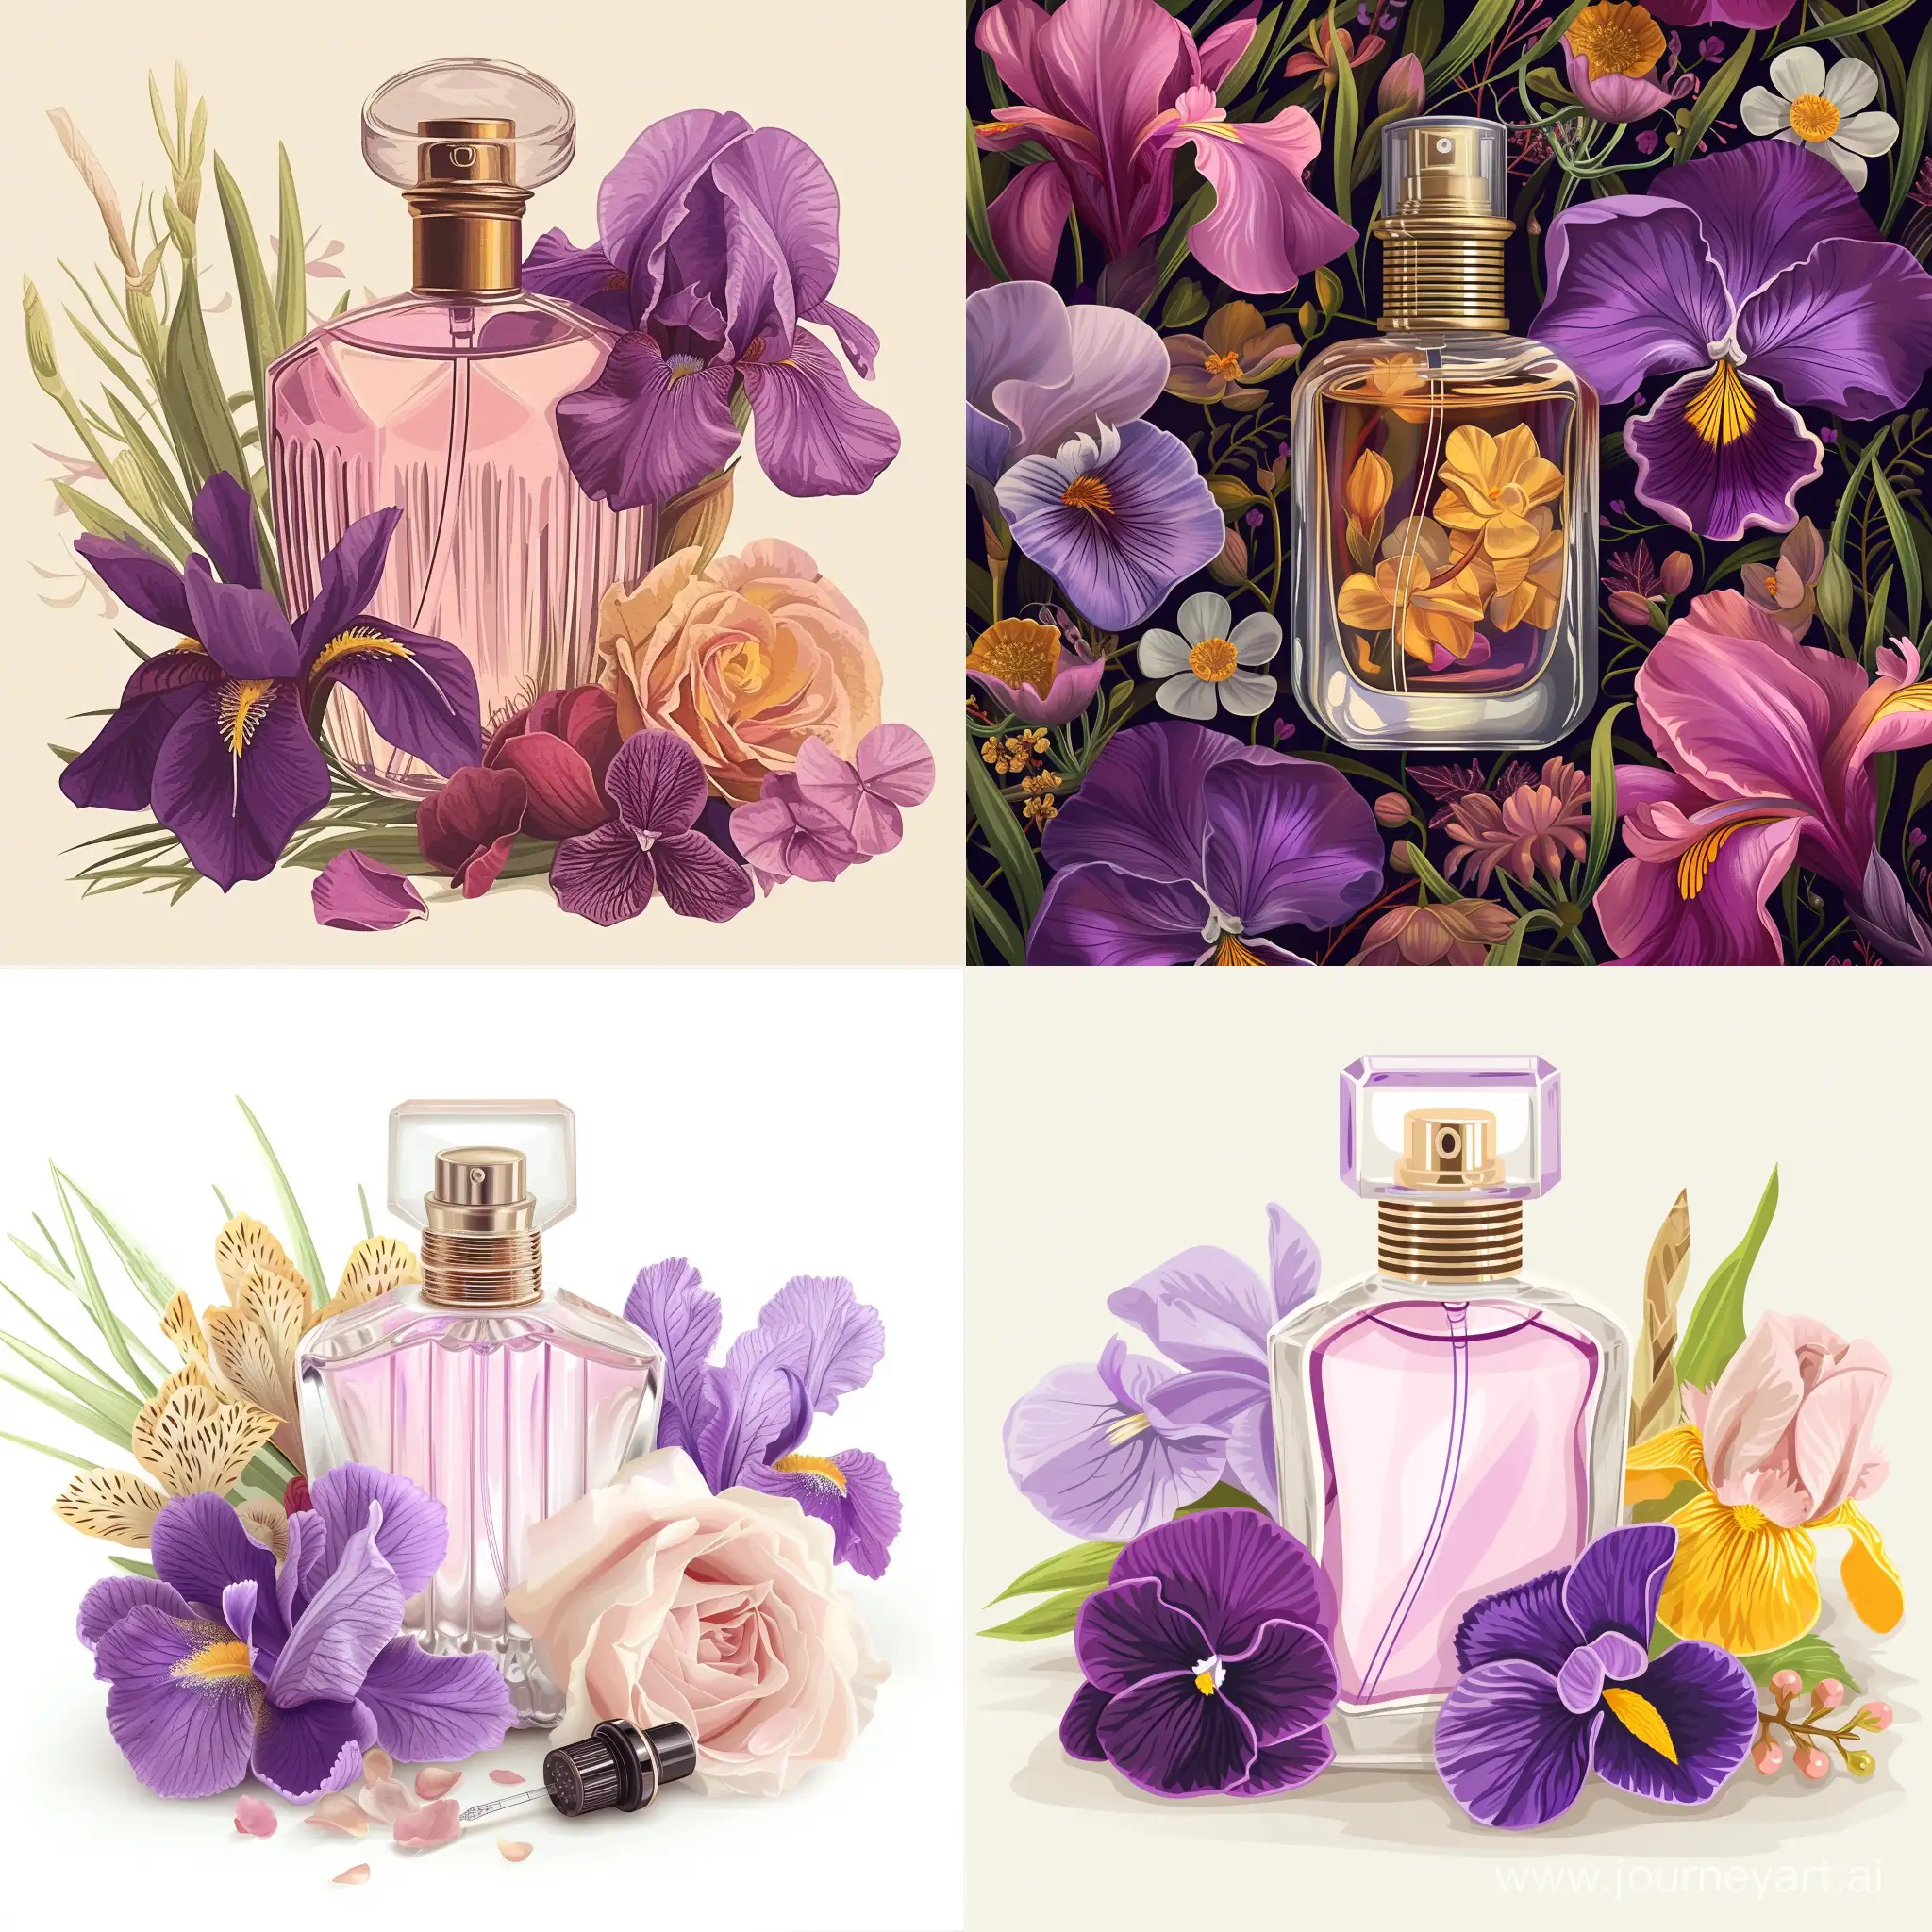 Exquisite-Perfume-Bottles-with-Violet-Iris-Rose-and-Heliotrope-Accents